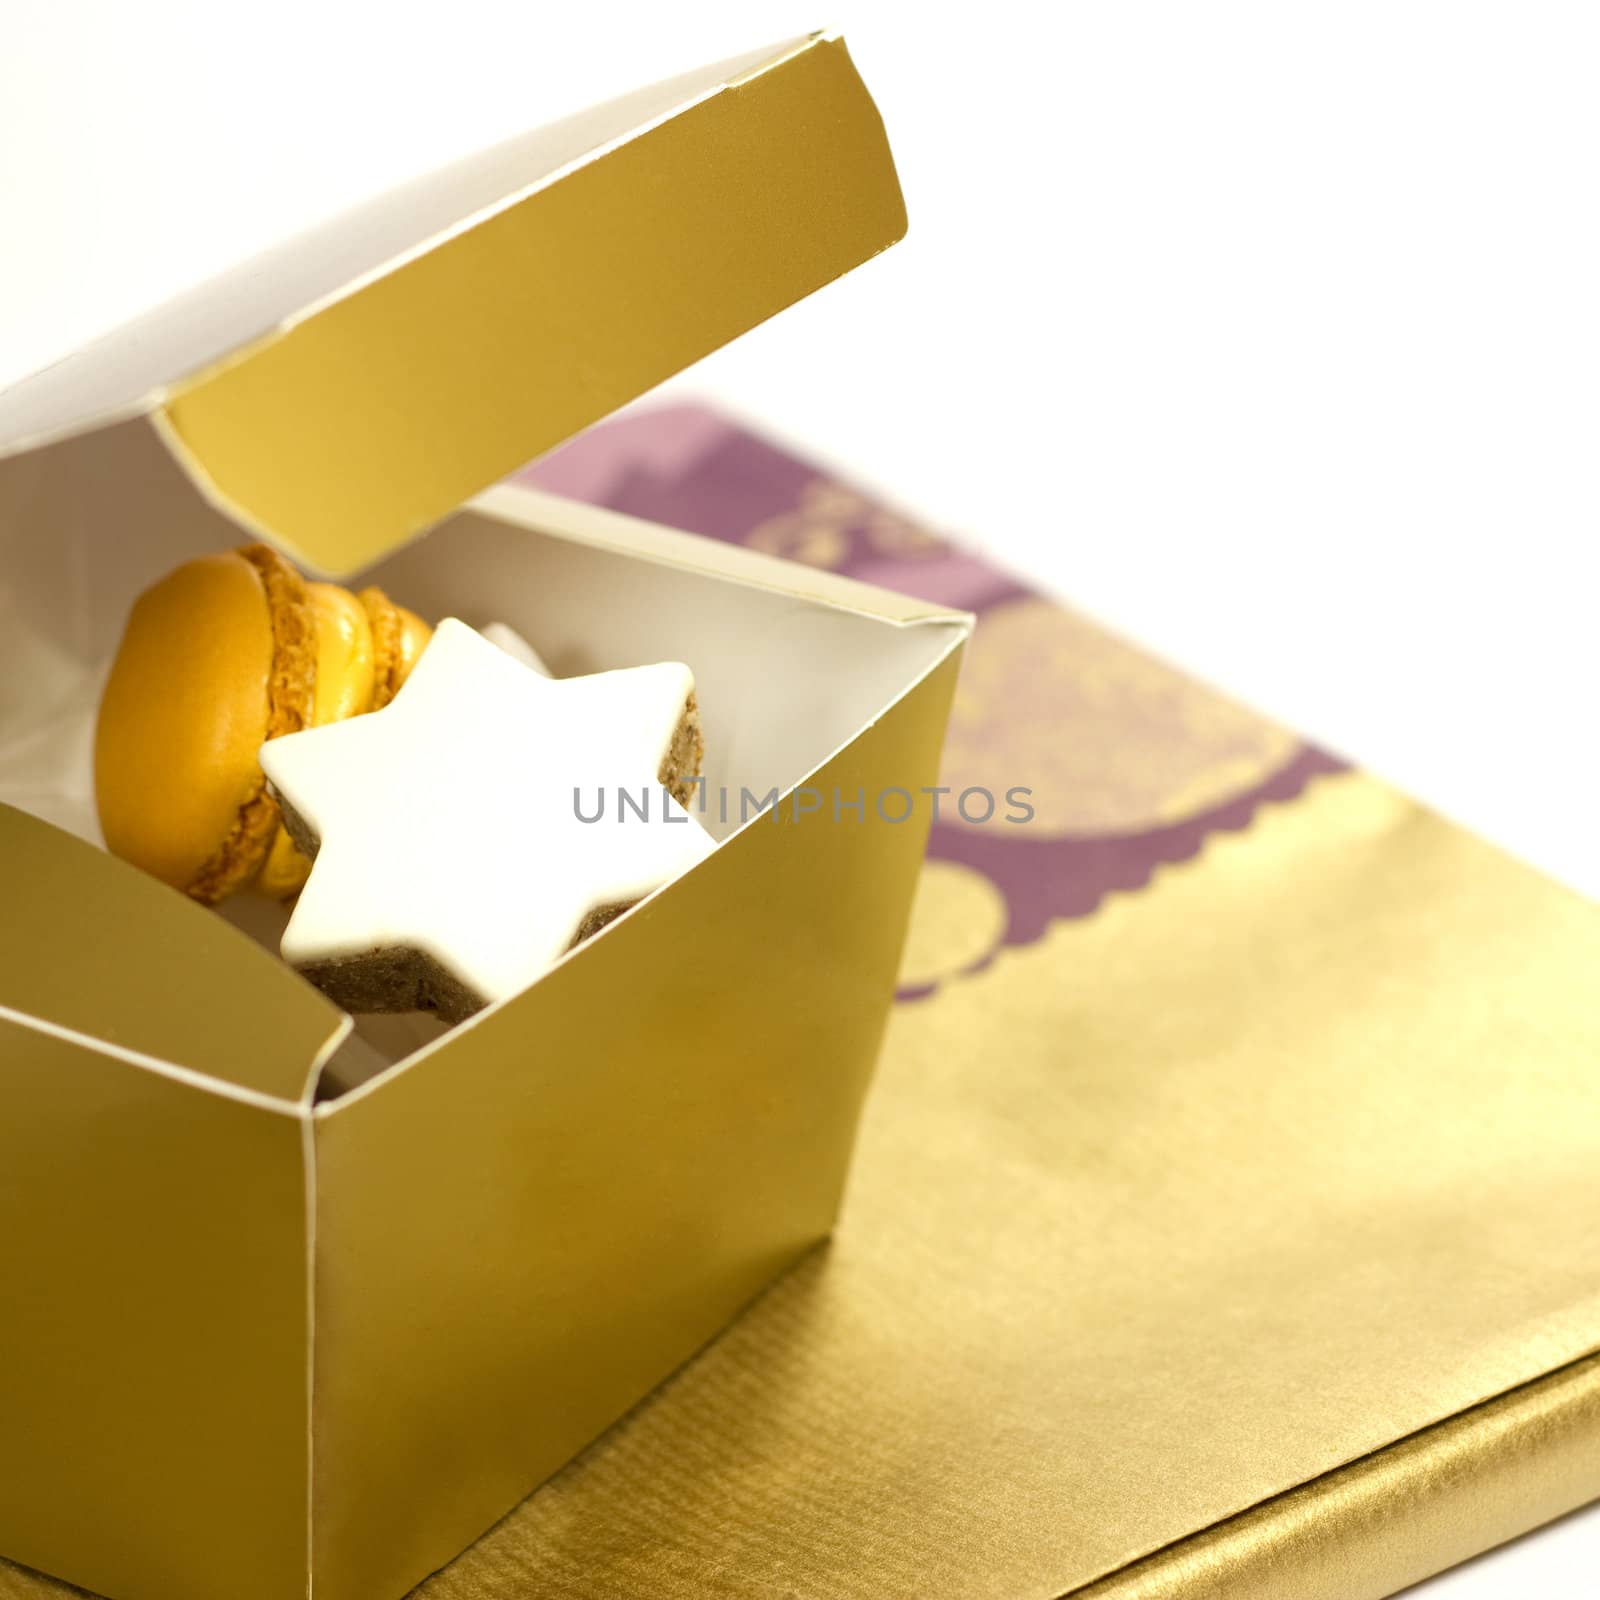 Cookies in a present box on decoration on a white background